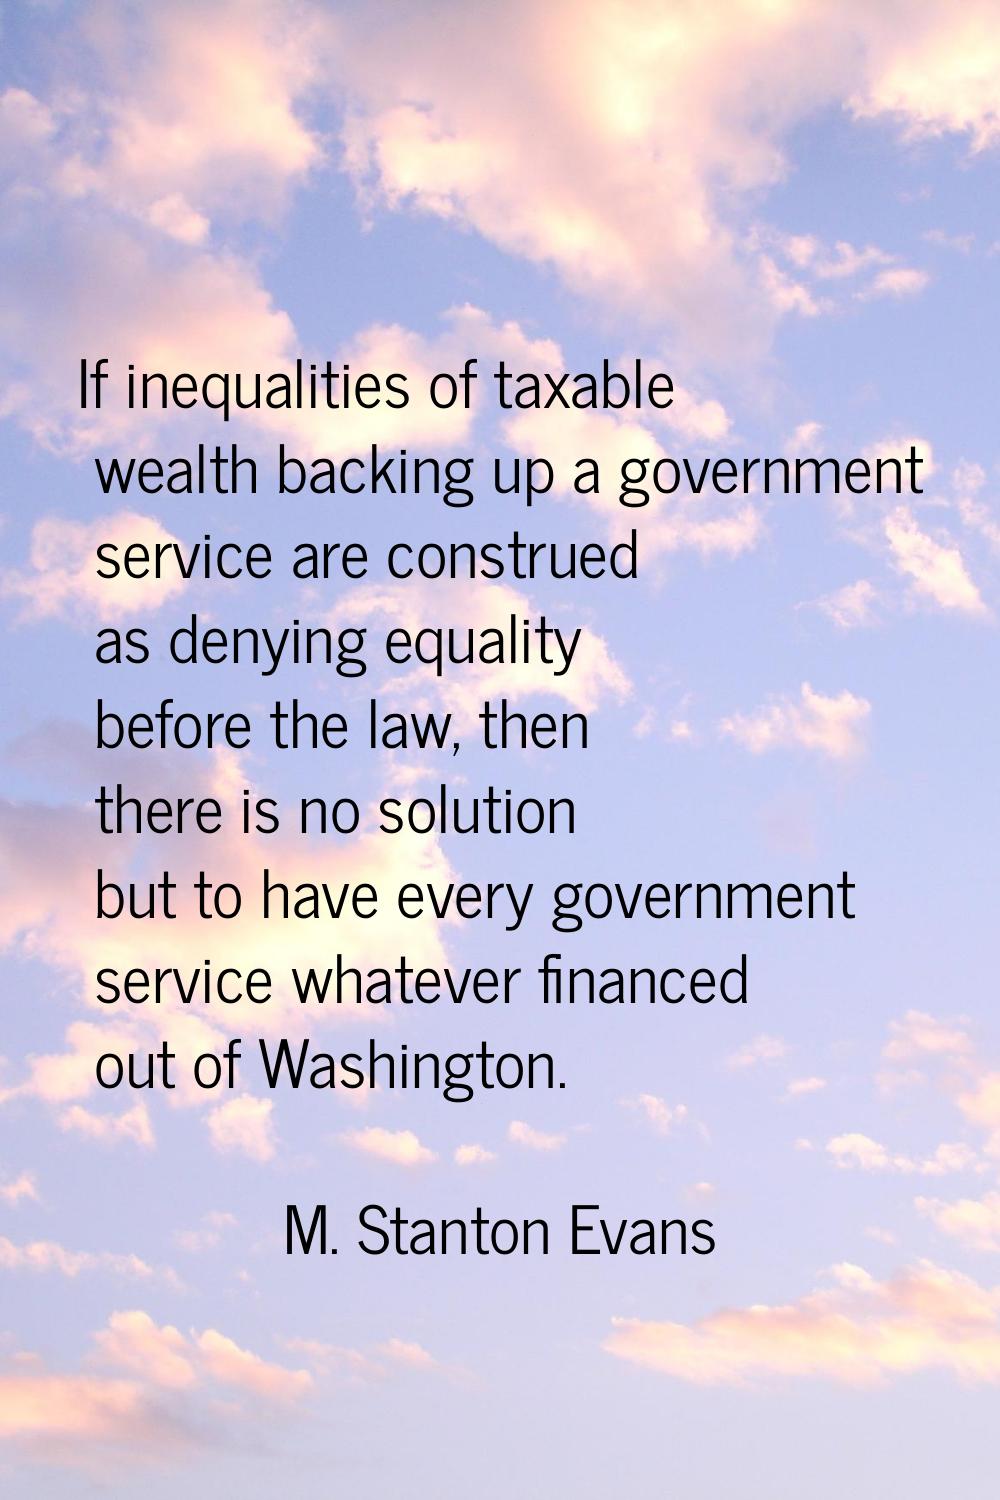 If inequalities of taxable wealth backing up a government service are construed as denying equality